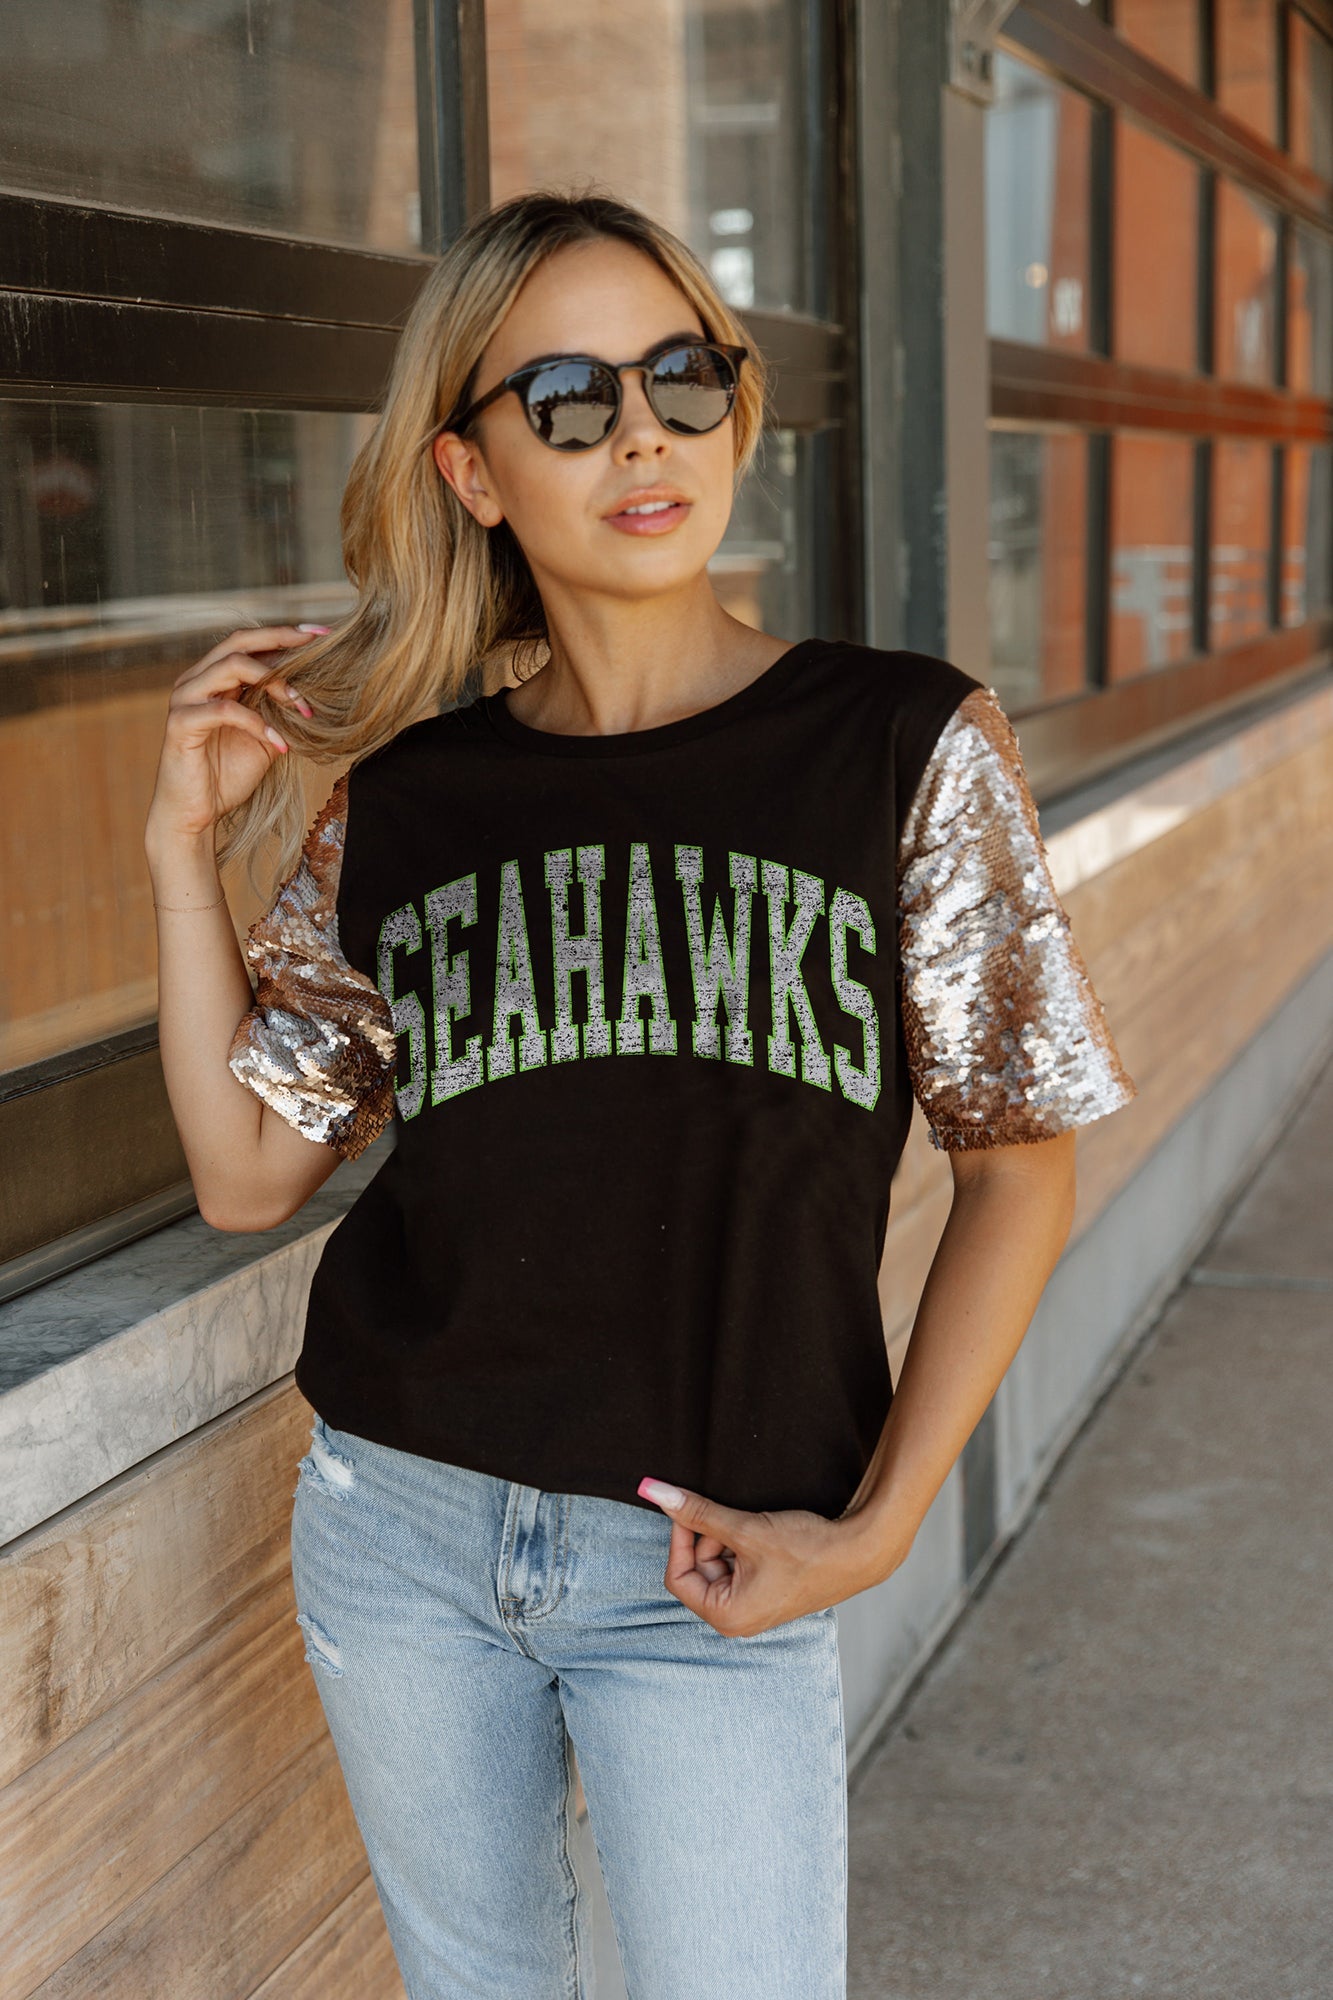 SEATTLE SEAHAWKS GL SHORT SLEEVE TOP WITH LINED FLIP-SEQUIN